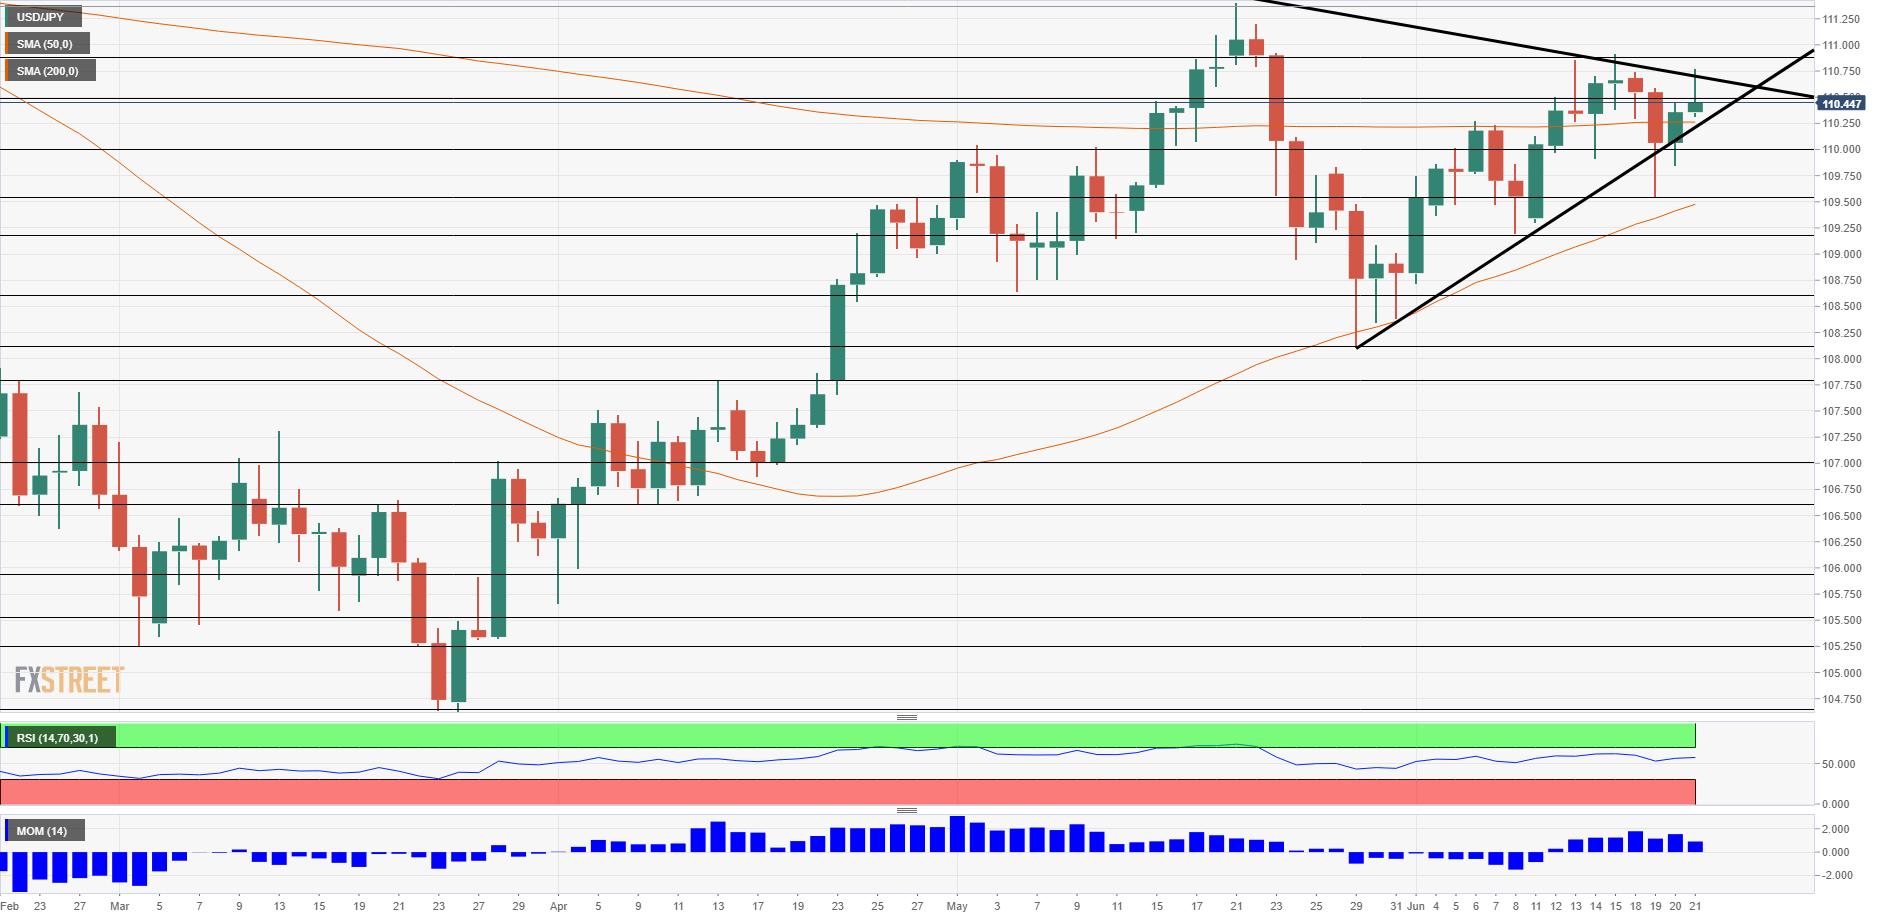 USD JPY daily technical chart June 25 29 2018